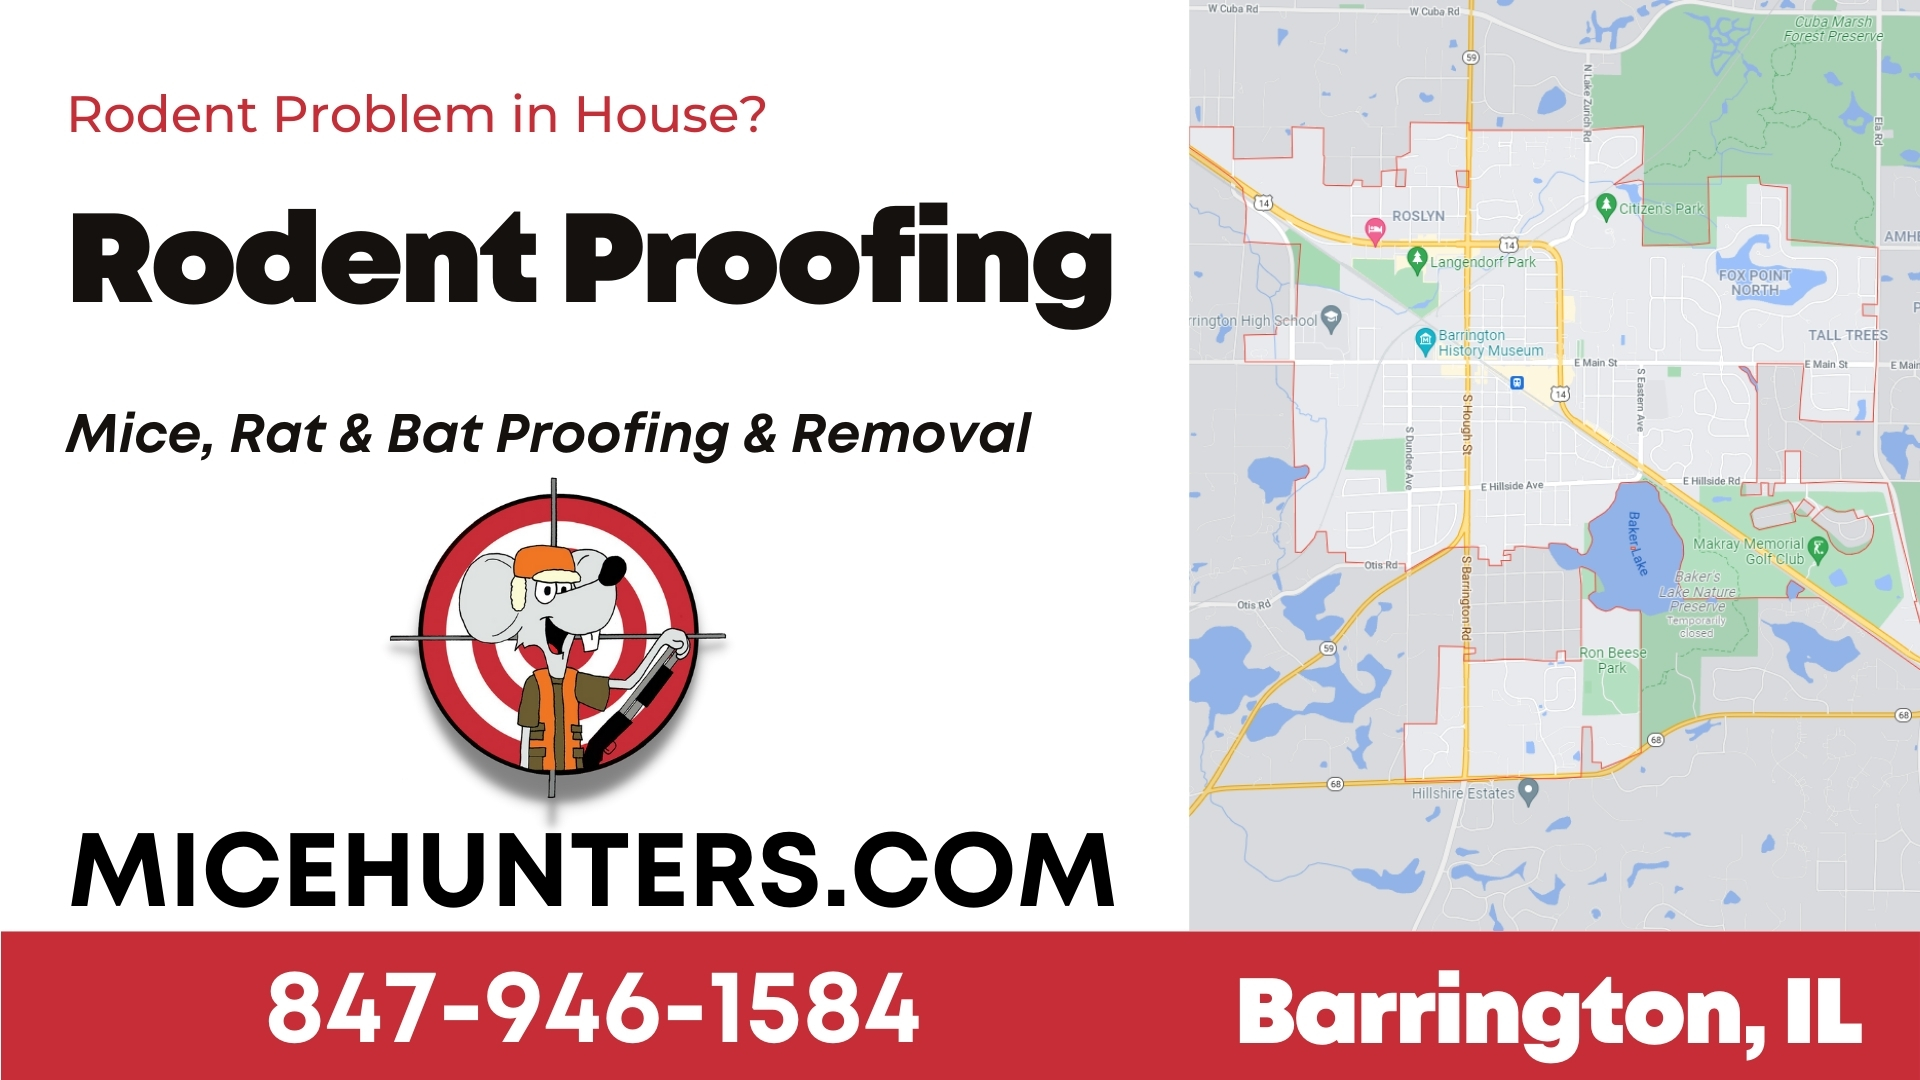 Barrington Rodent and Mice Proofing Exterminator